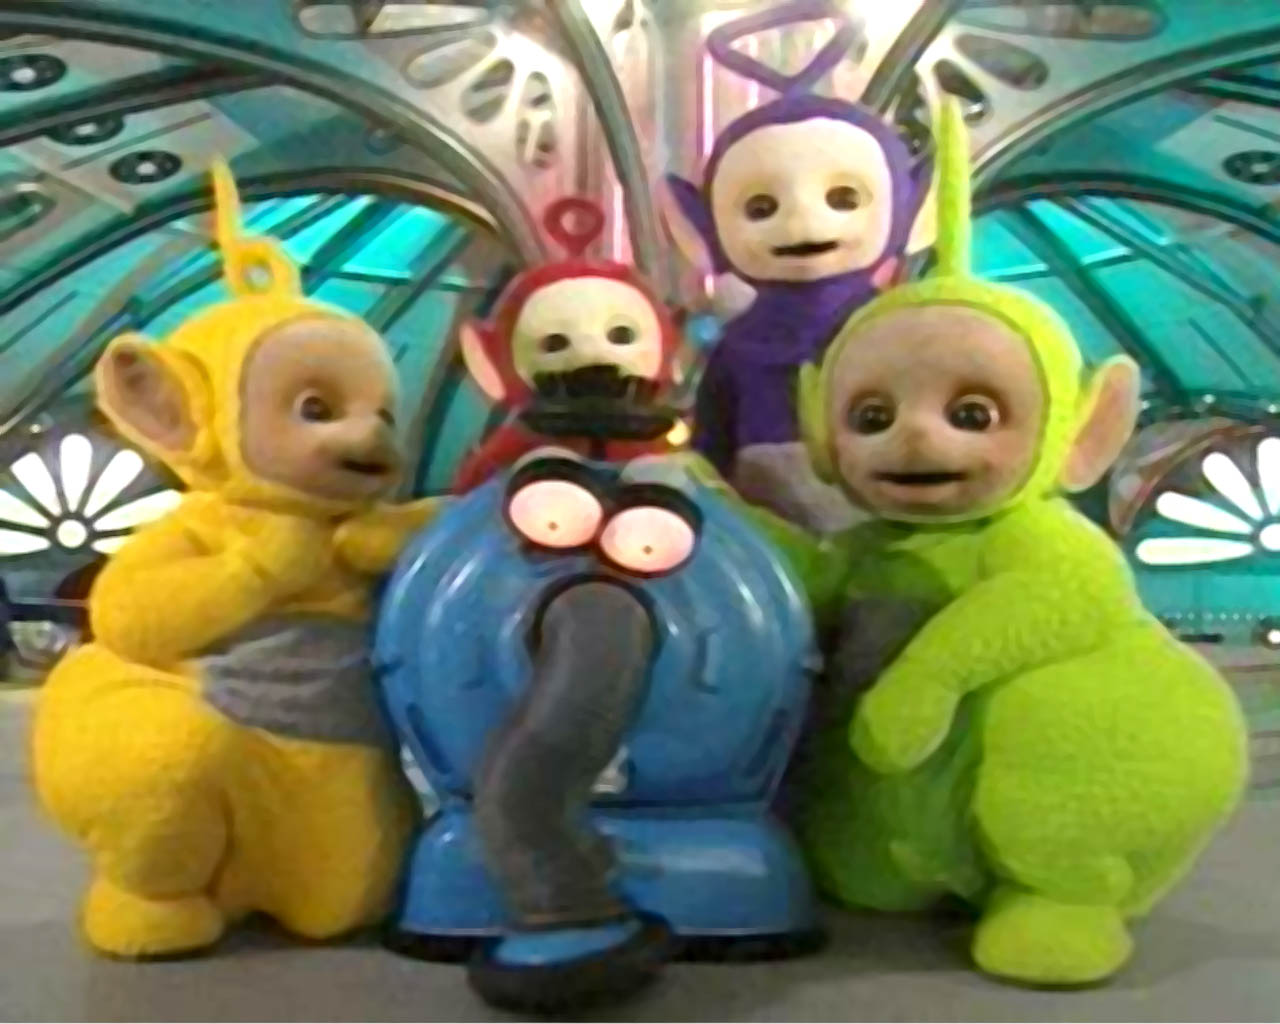 Costume Teletubbies Reflections On Leisure Doing Under A